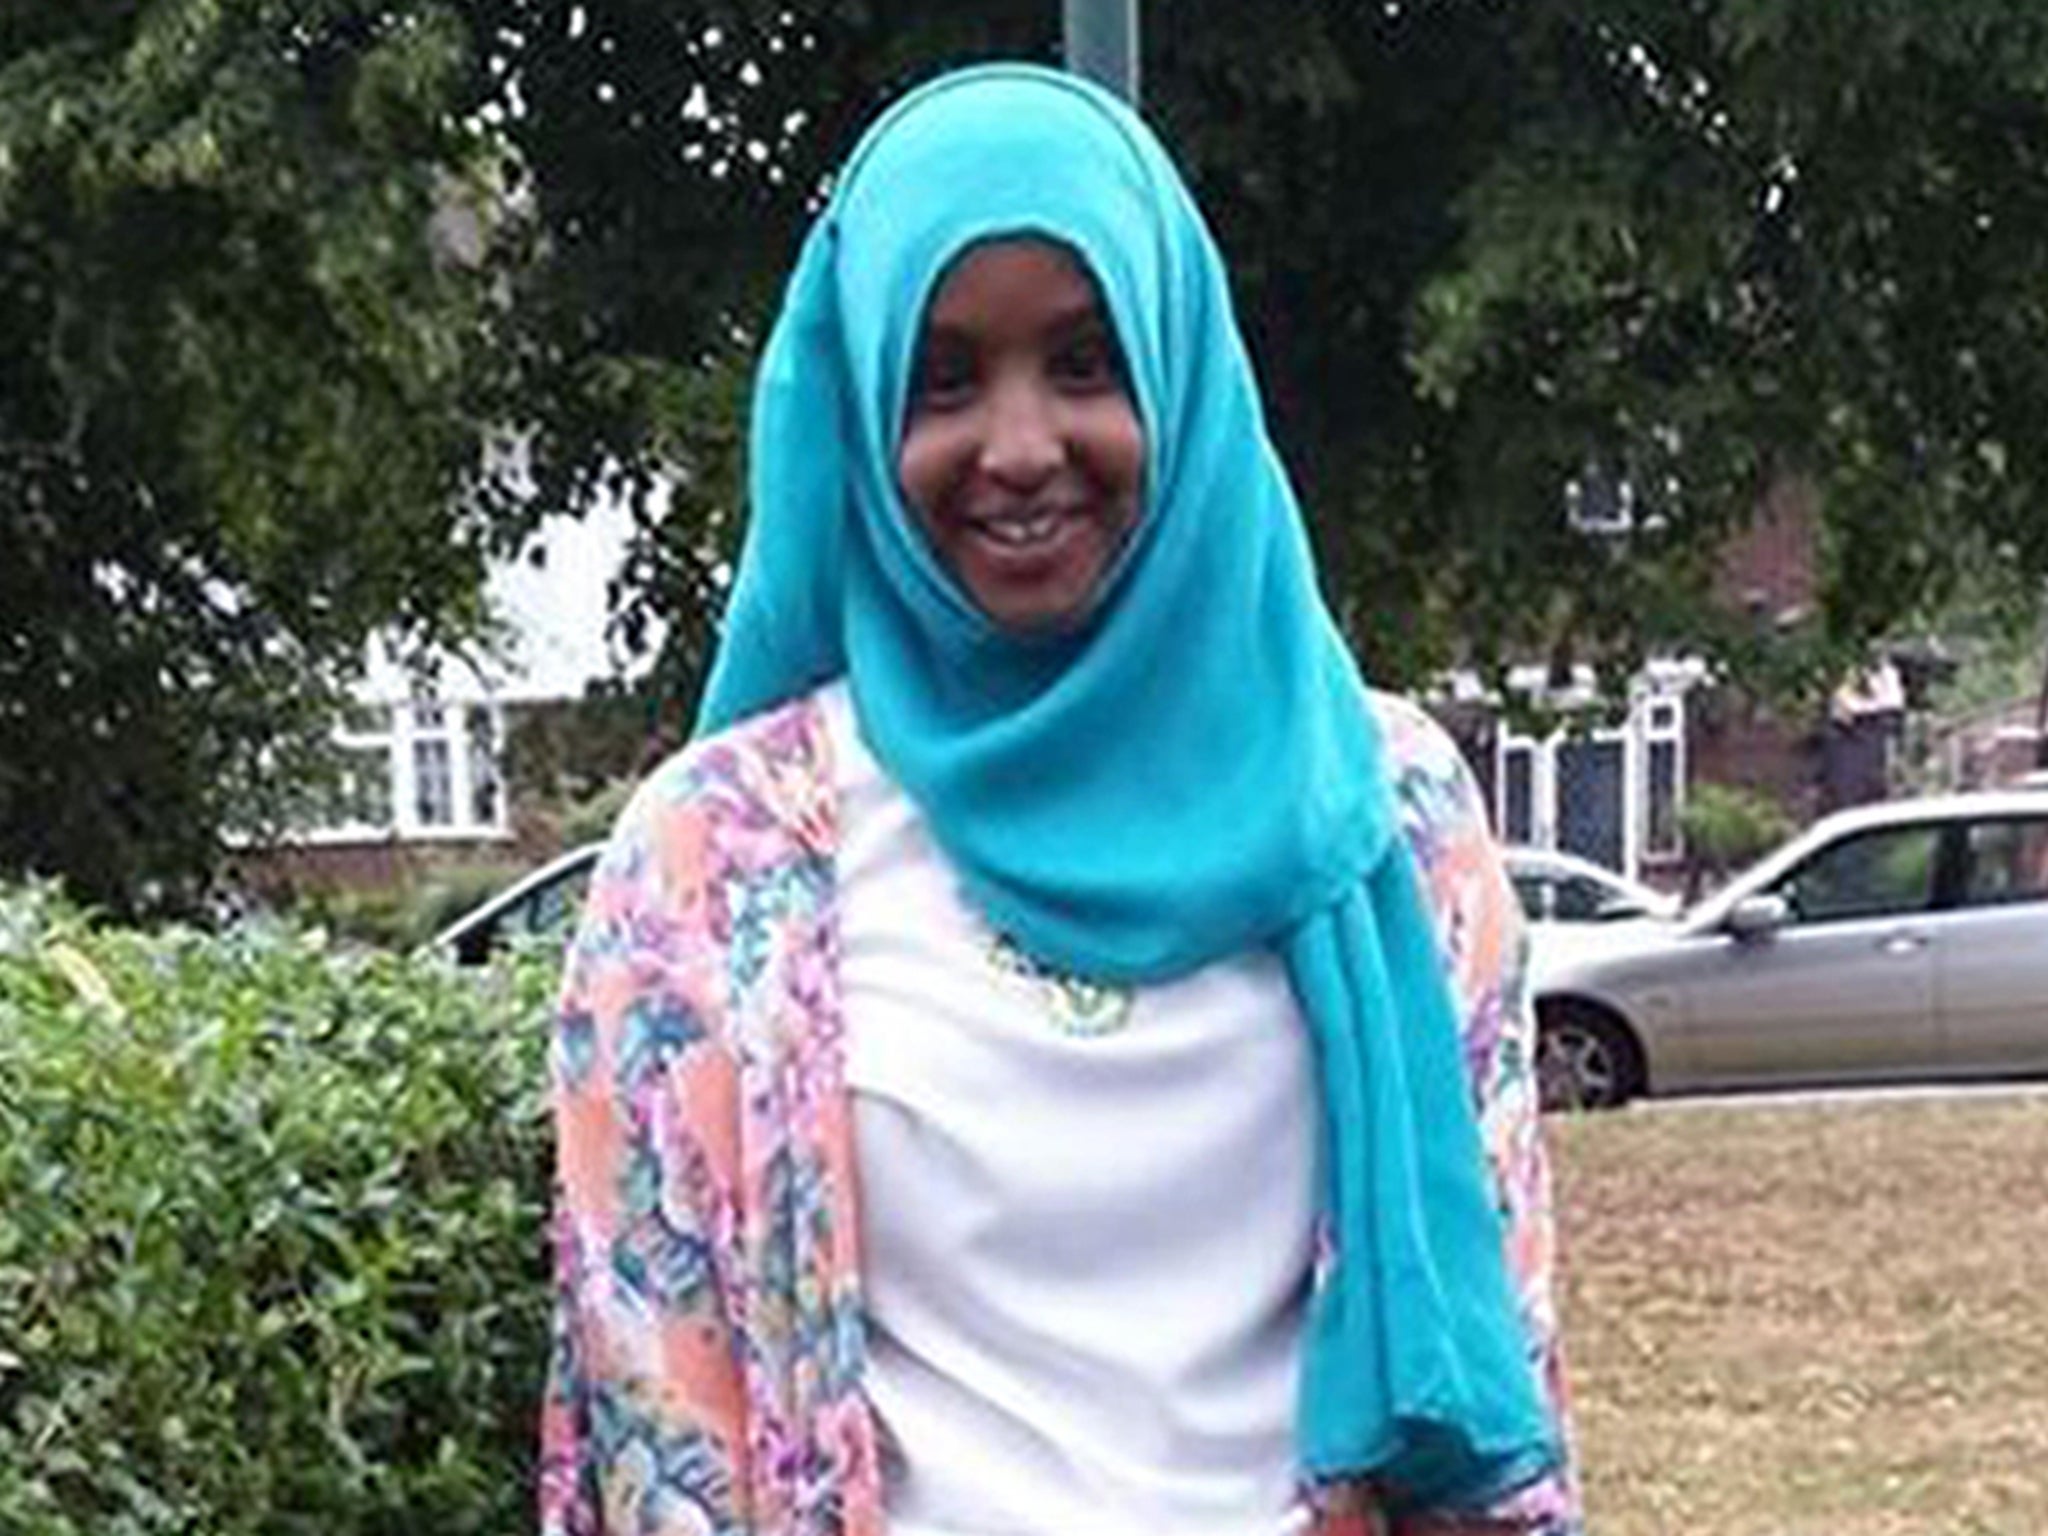 Yusra Hussien was reported missing from her home last week and is believed to be travelling to Syria